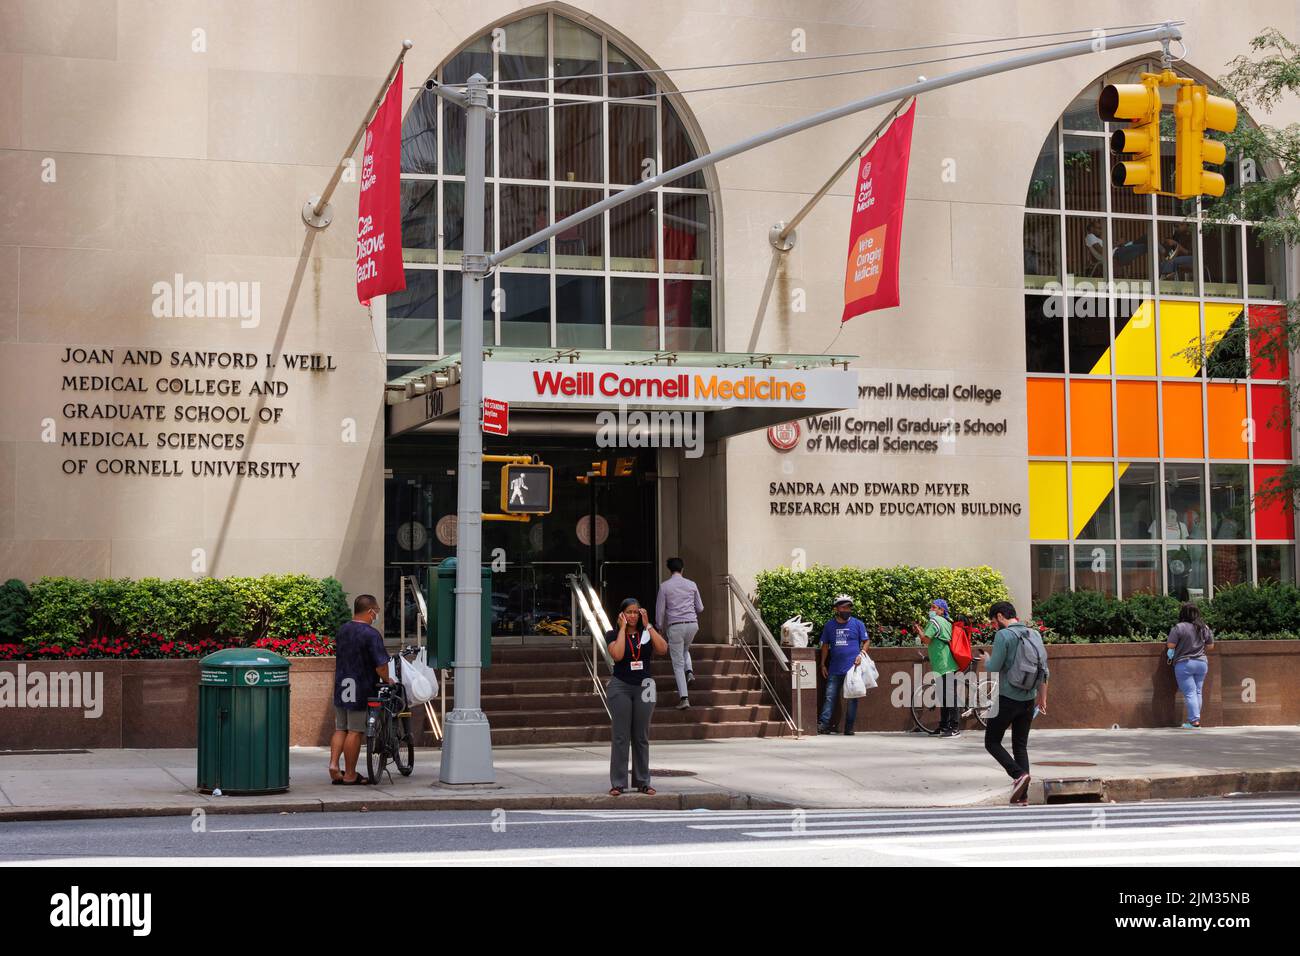 entrance to Weill Cornell Medical College on York Avenue on the Upper East Side of Manhattan, New York City on a busy summer day Stock Photo